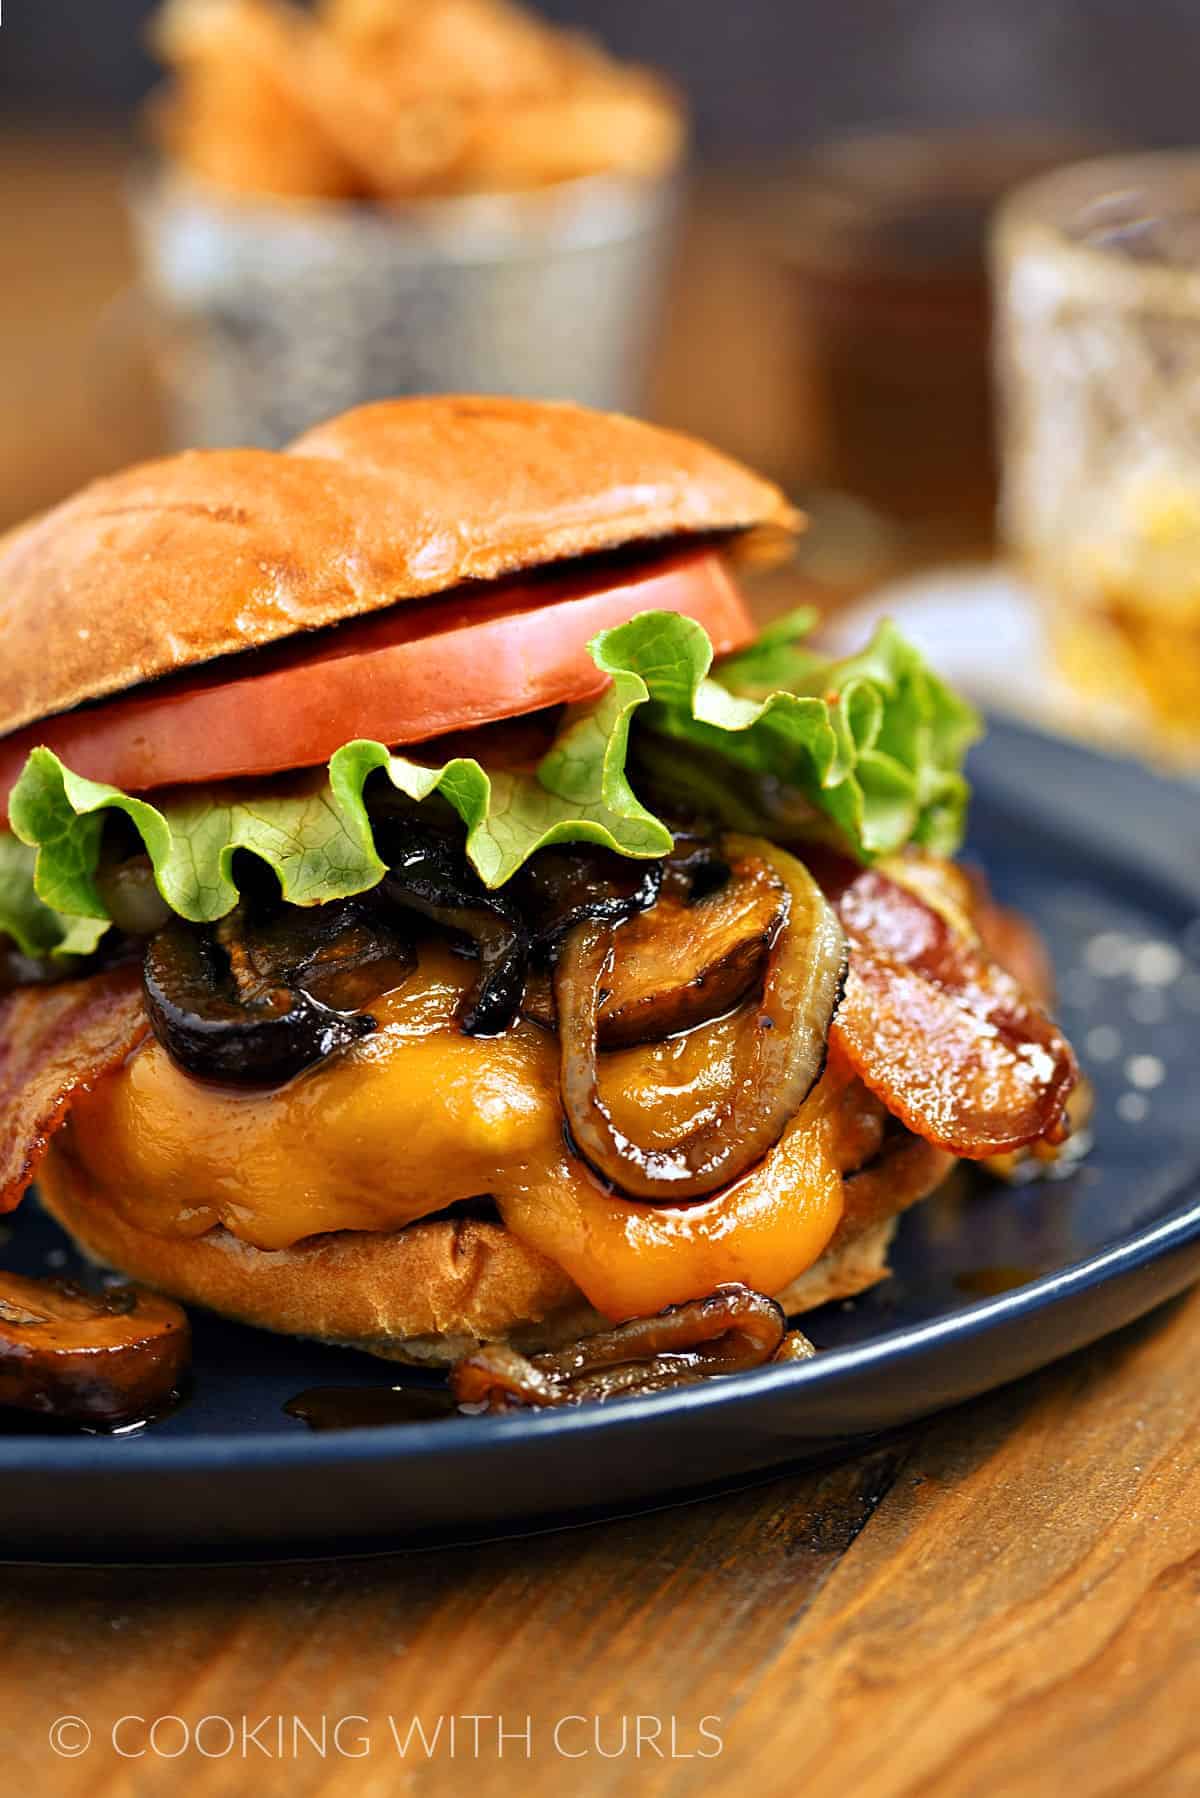 Burger topped with melted cheddar cheese, onions, mushrooms and glaze with a metal bucket of fries on the side.